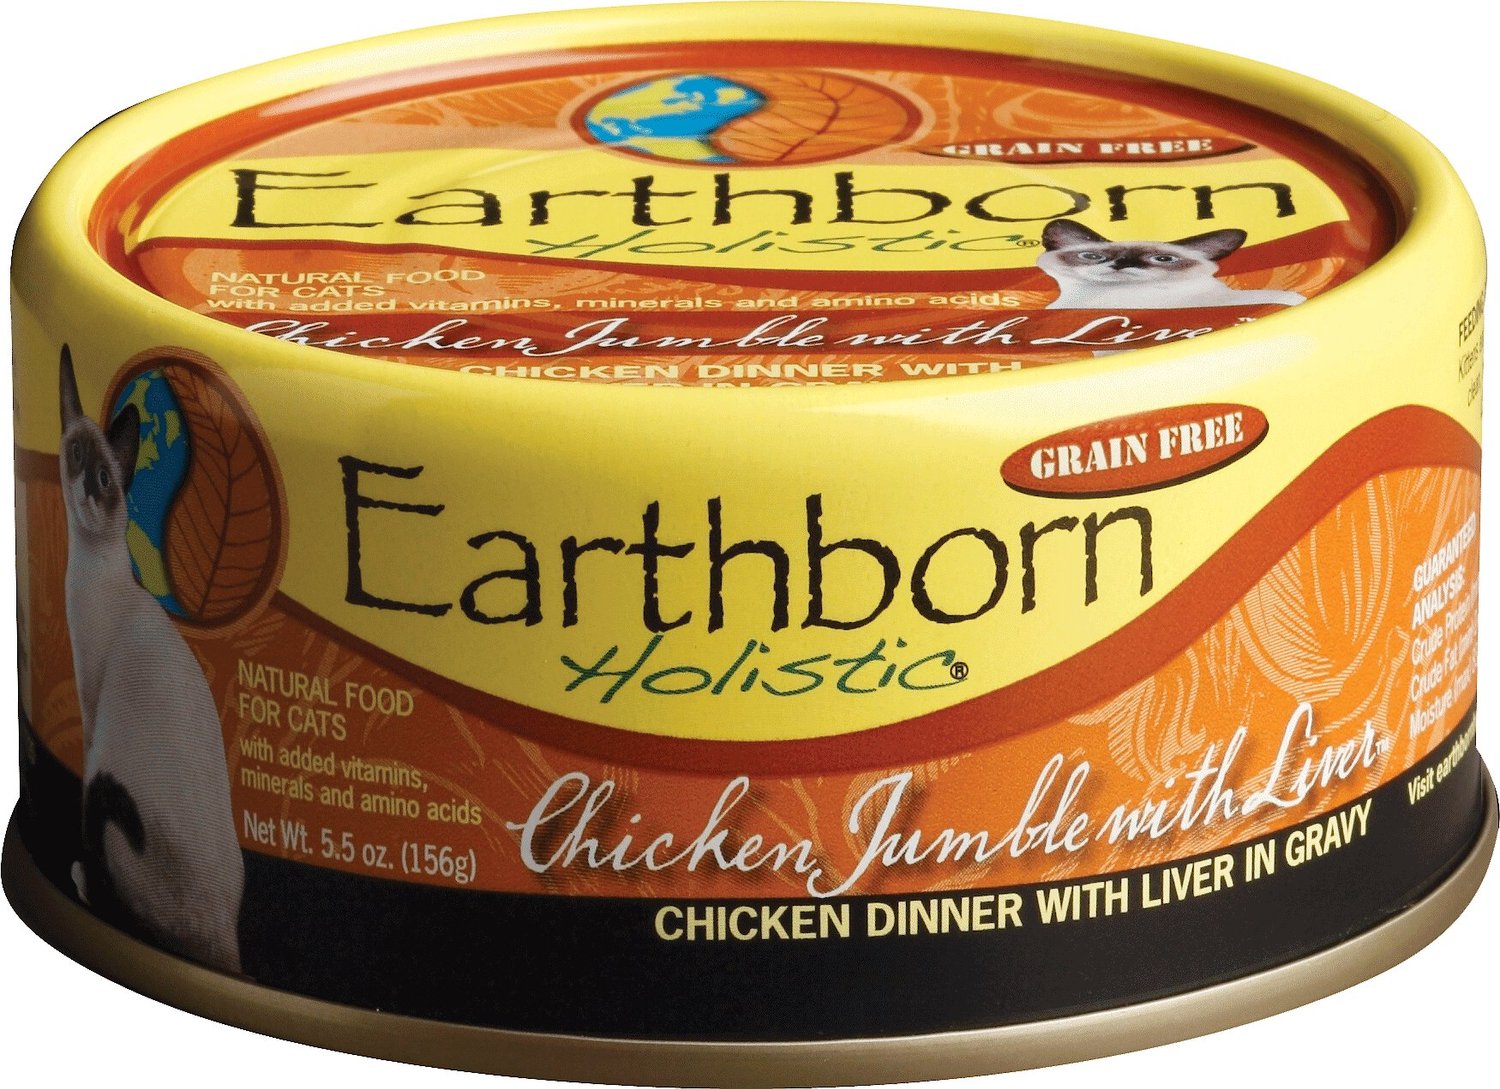 EARTHBORN HOLISTIC Chicken Jumble with 